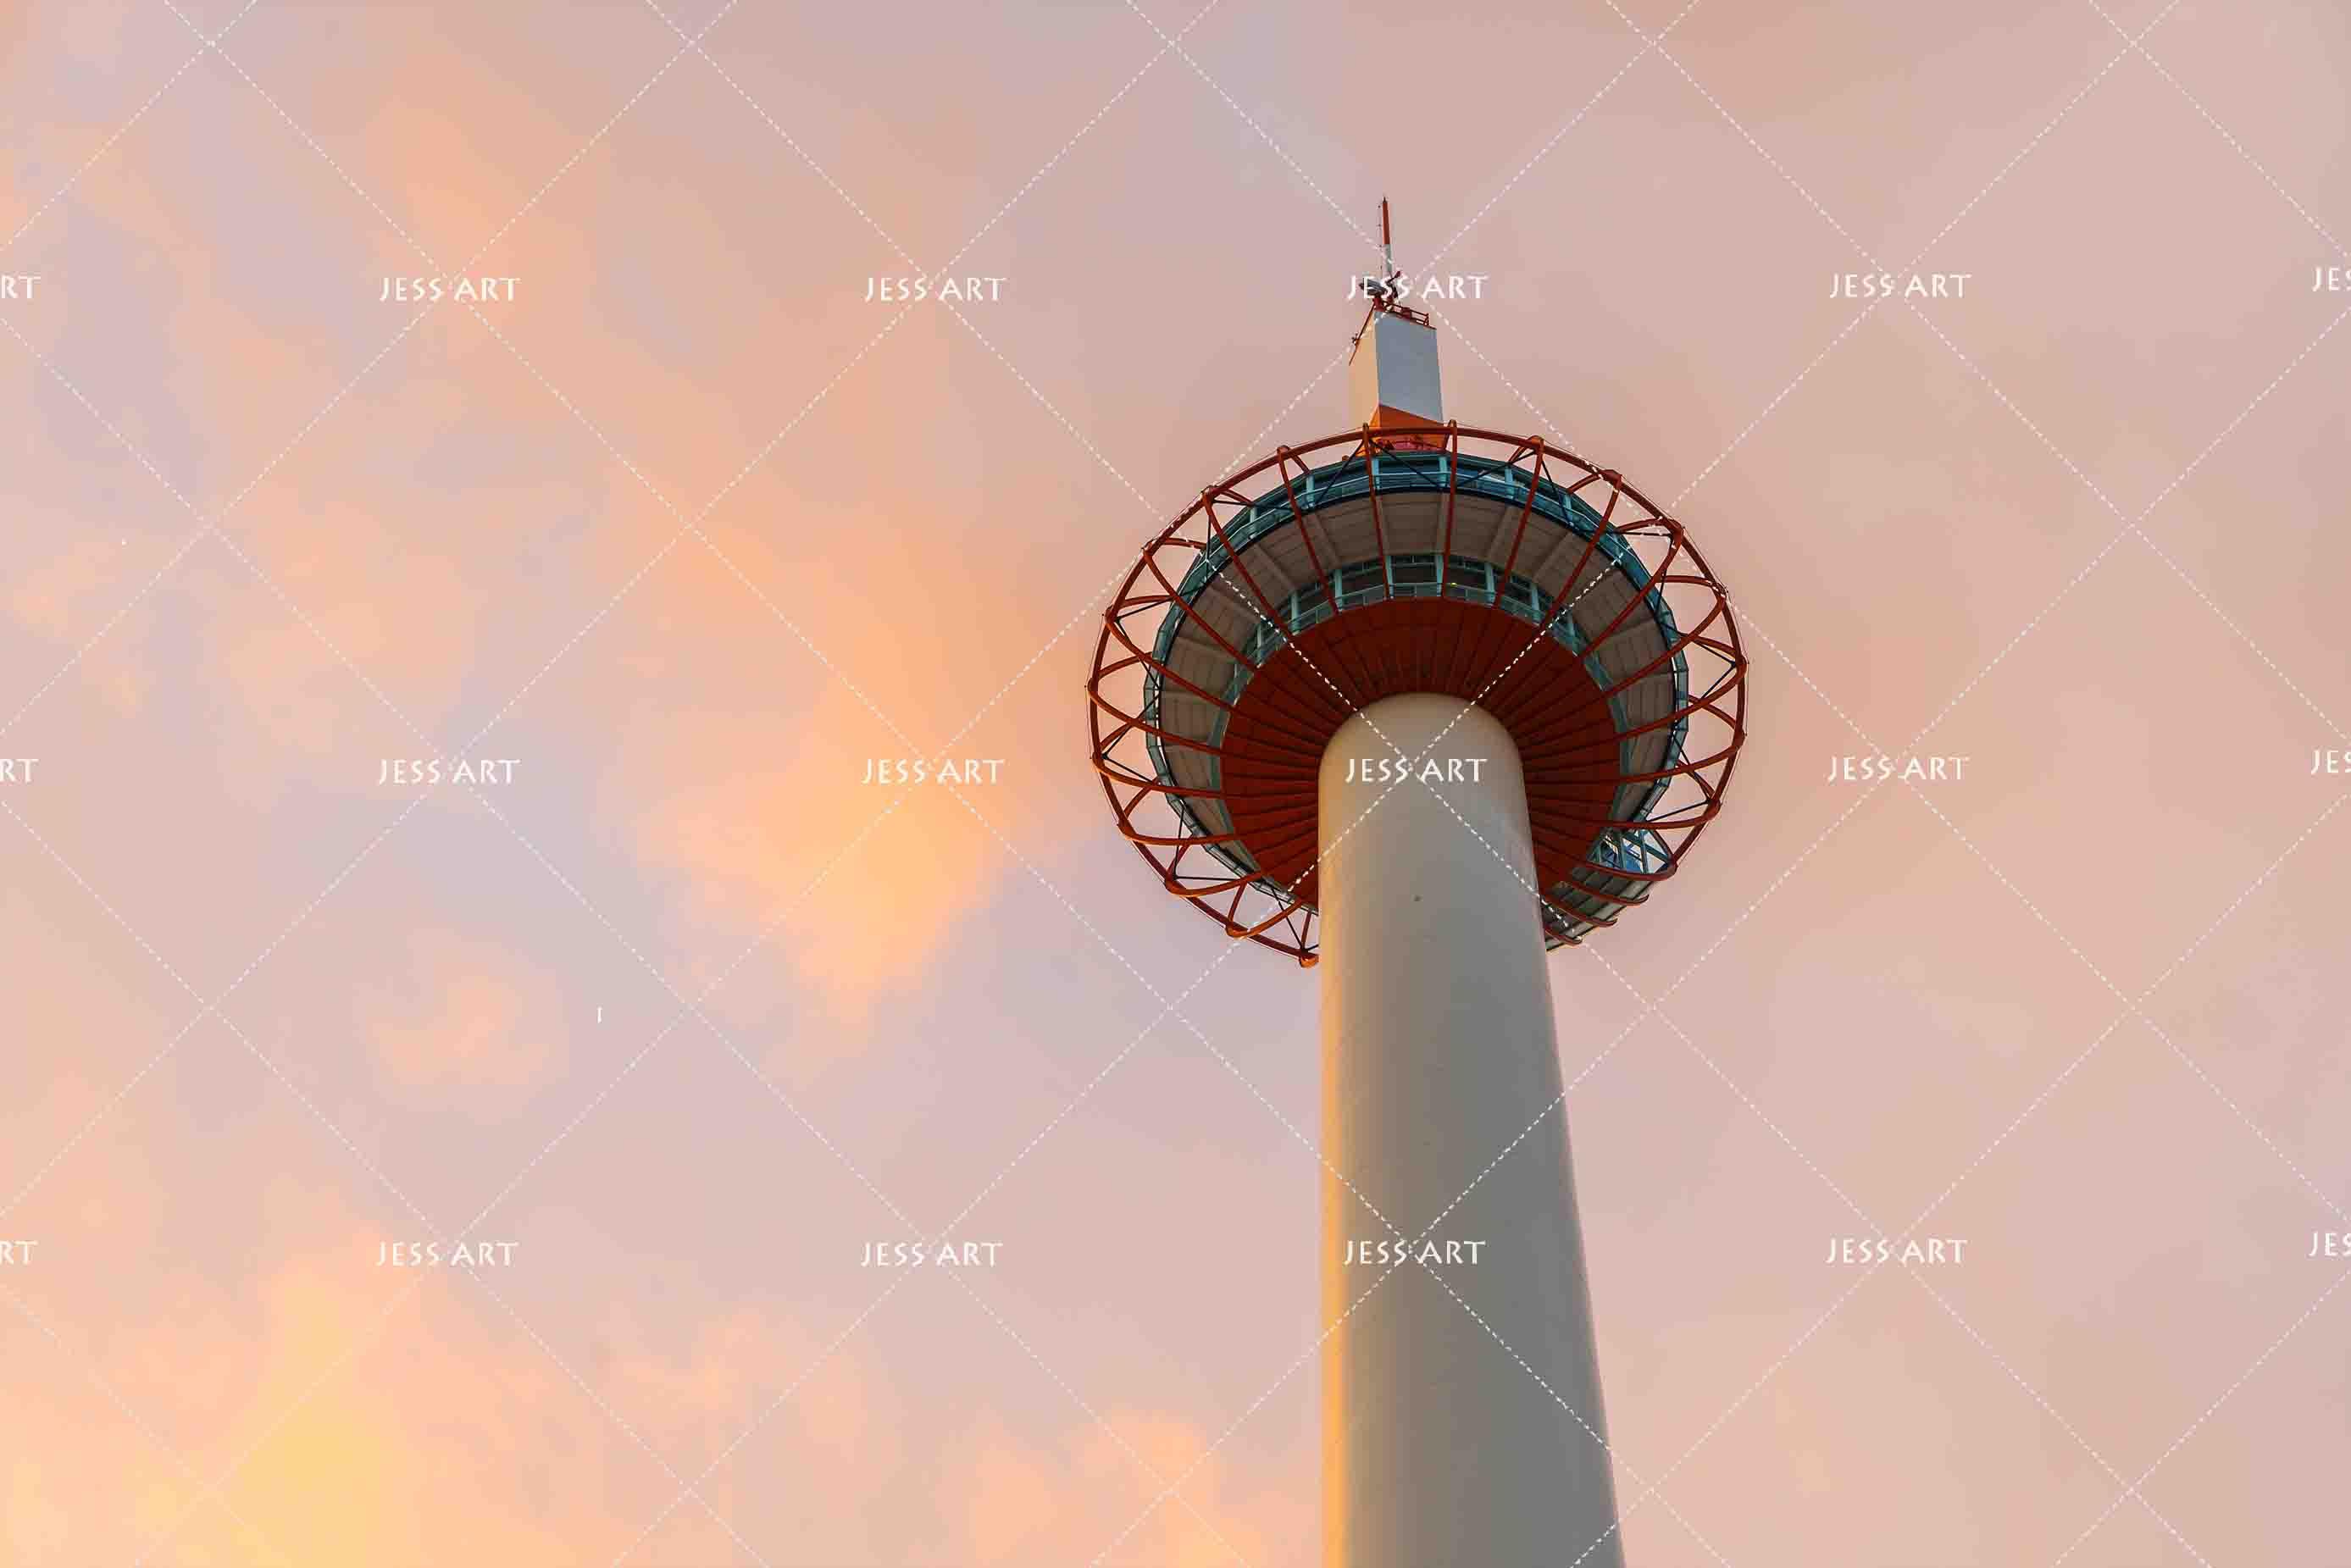 3D japan kyoto tower filtered image processed vintage effect wall mural wallpaper 45- Jess Art Decoration